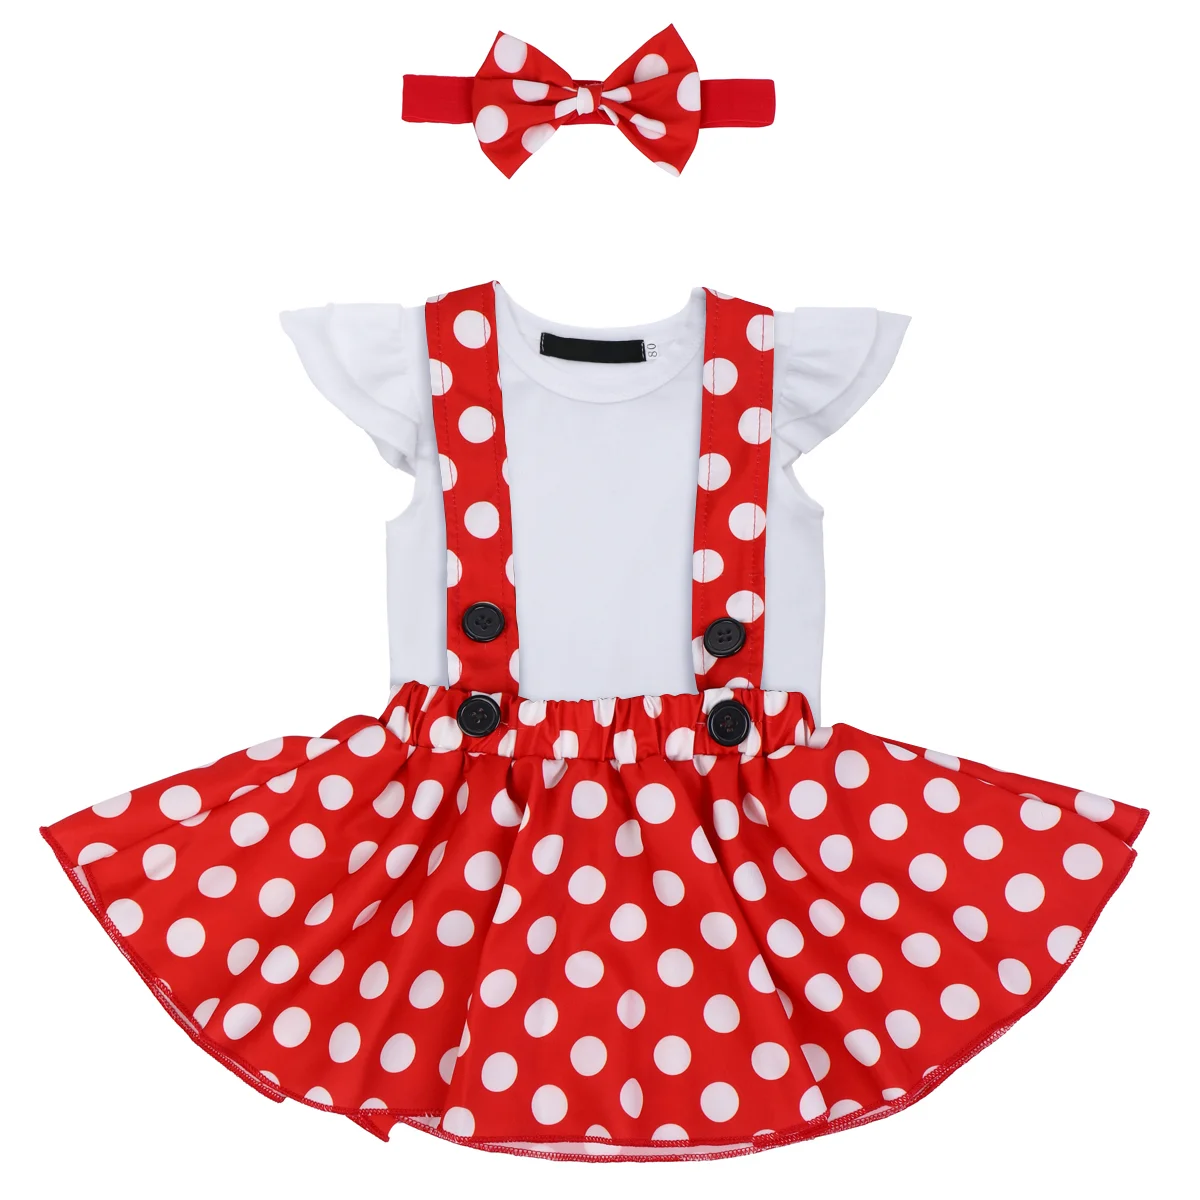 Girl Baby Birthday Clothes Cake Smash Outfit Polka Dot Outfit Cute Minnie Fancy Dress up Baby Girls Clothes Set Photography Prop - Цвет: White